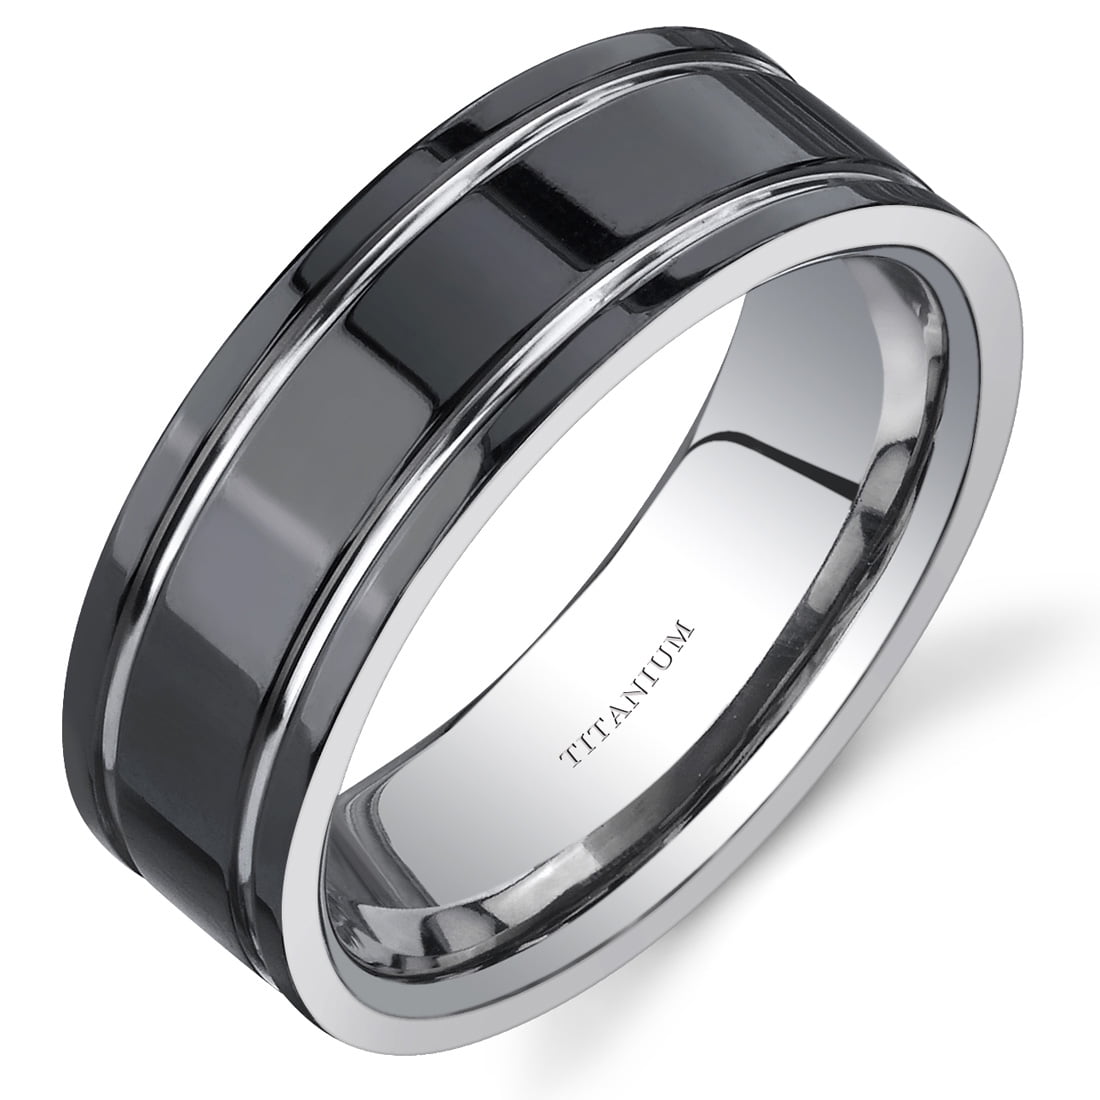 Stainless Steel Ring Band for Men 8MM Titanium Black Silver Gold Wedding Rings 